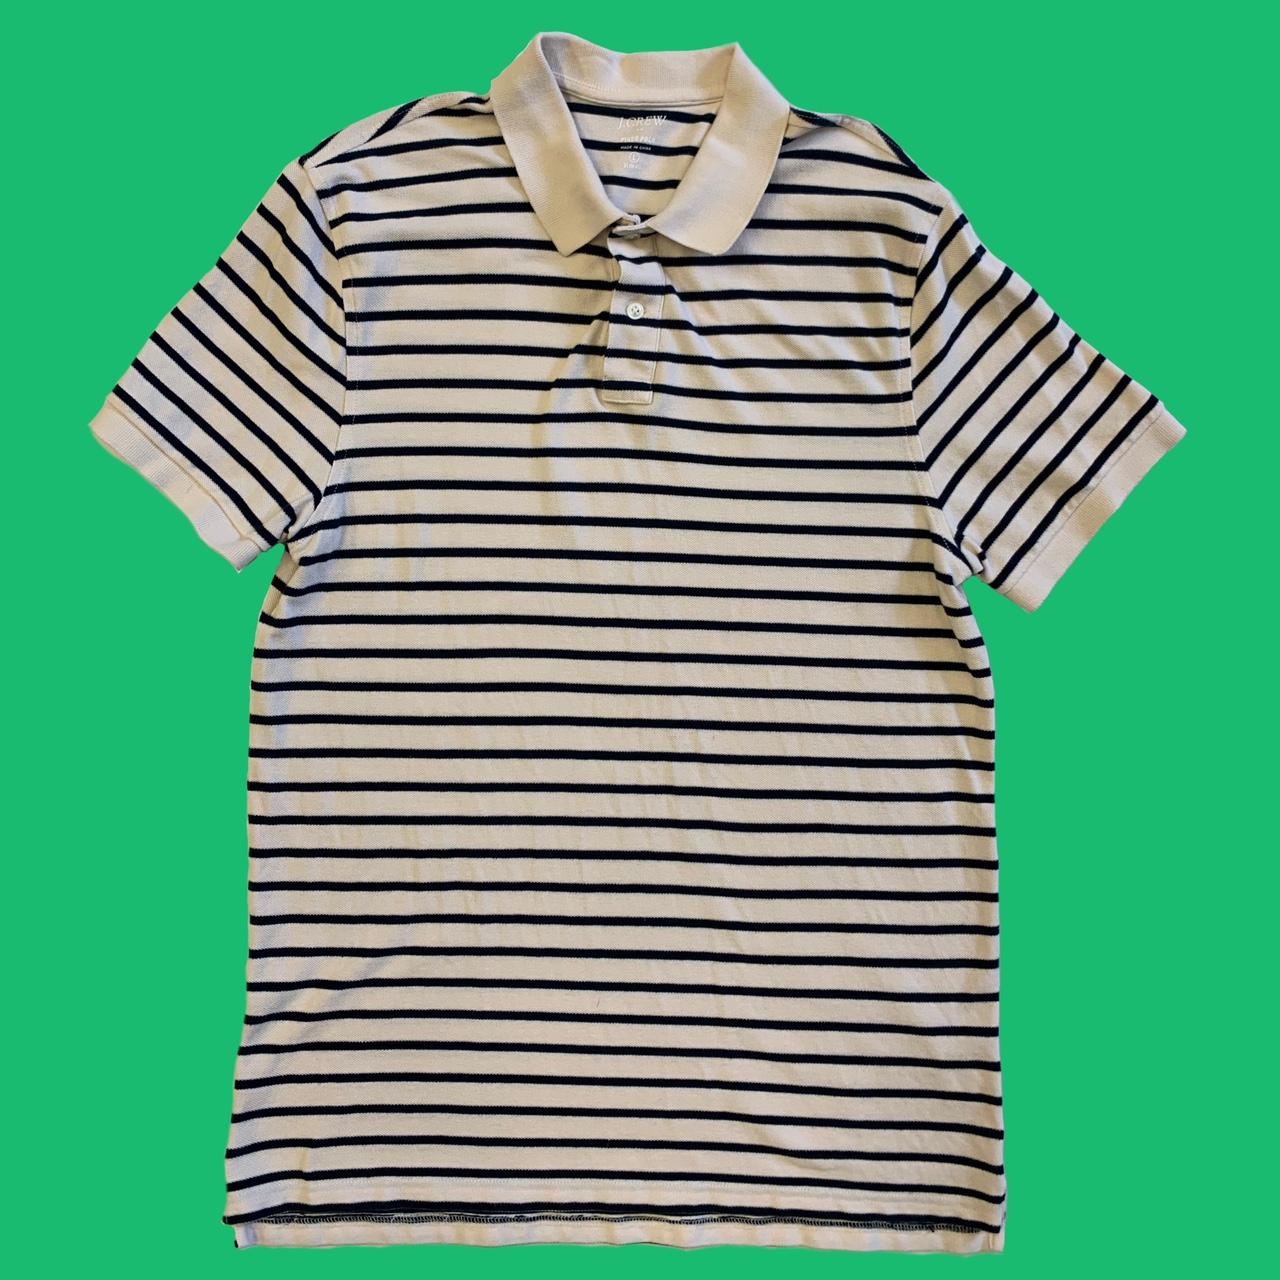 J.Crew Polo shirt Size large Good condition Clean... - Depop